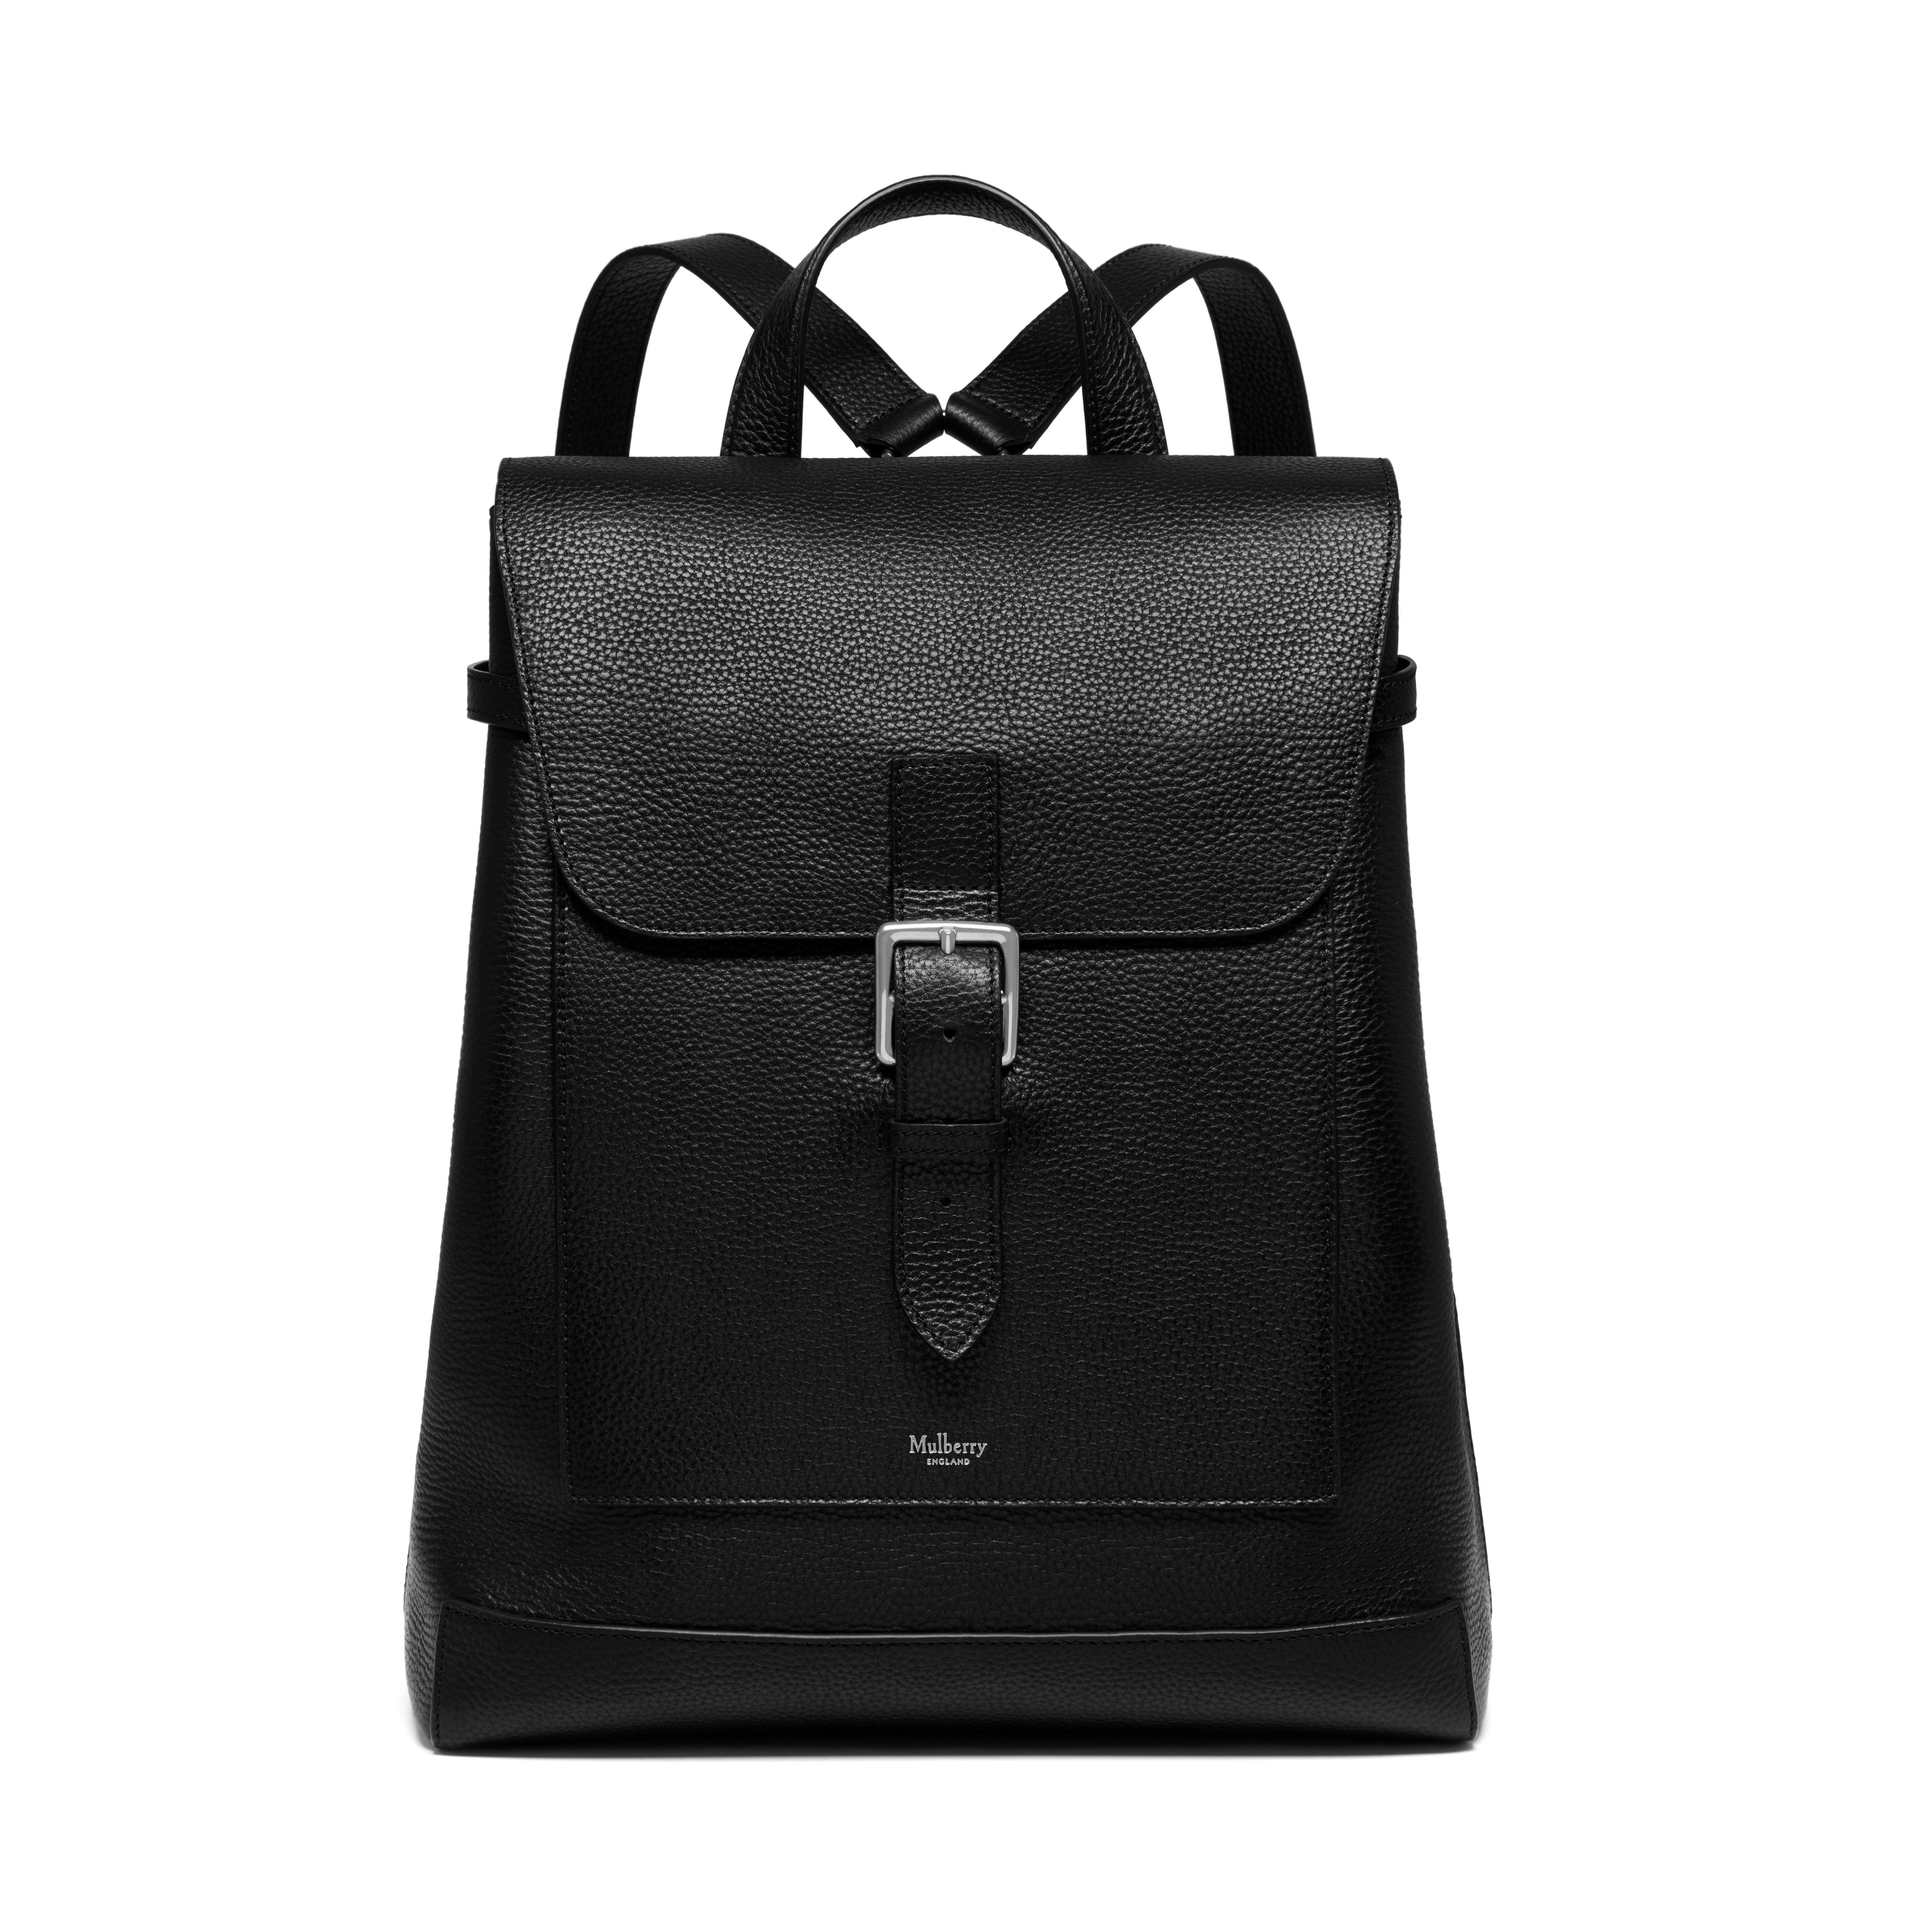 Mulberry Chiltern Backpack In Black Natural Grain Leather for Men - Lyst